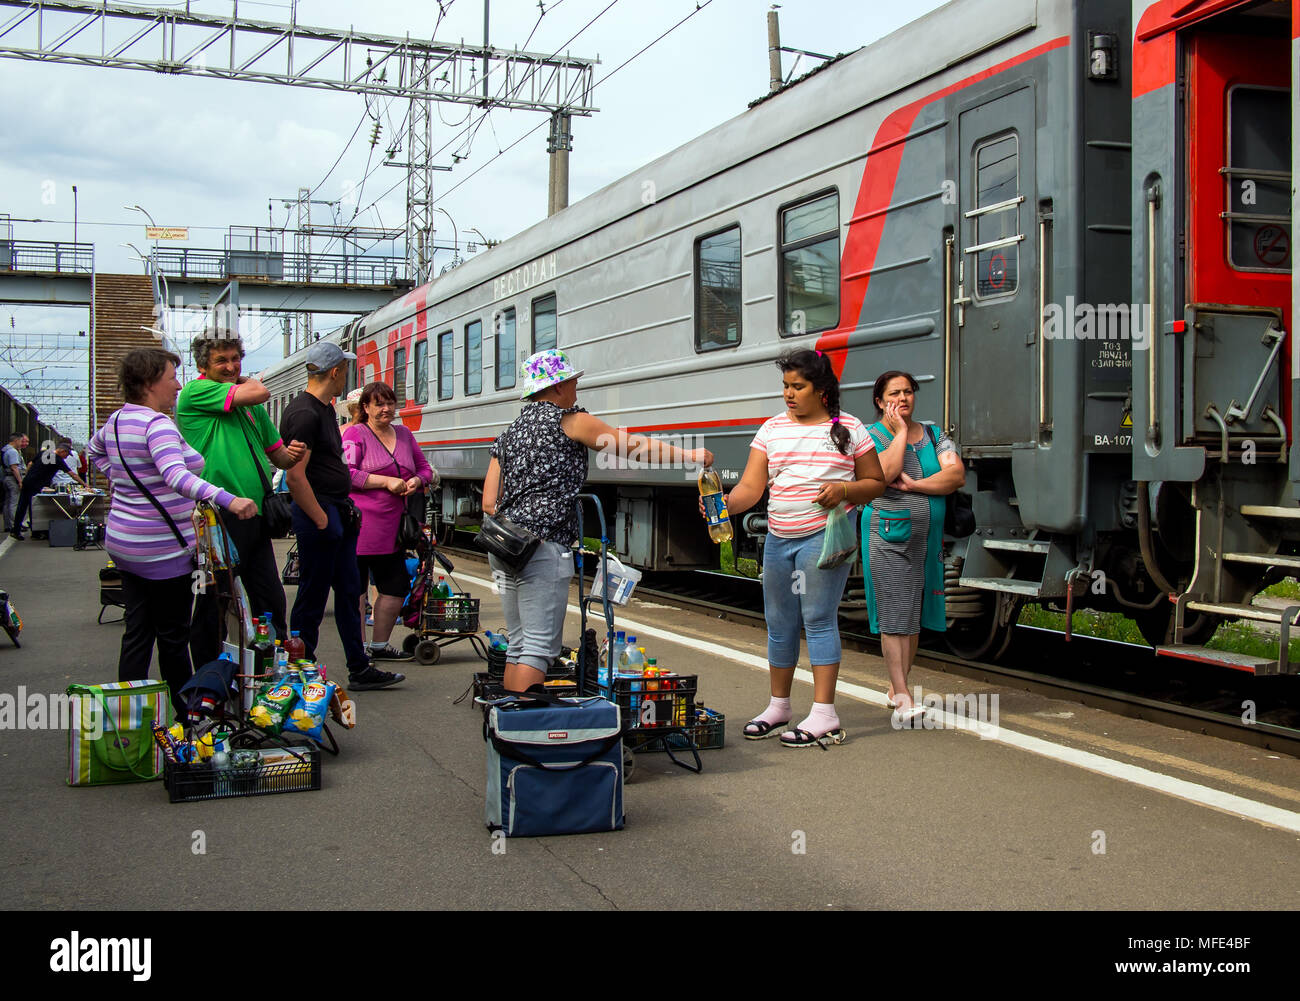 Petrozavodsk, Russia - June 18, 2017: Trade in products on the platform of the railway station Petrozavodsk Stock Photo